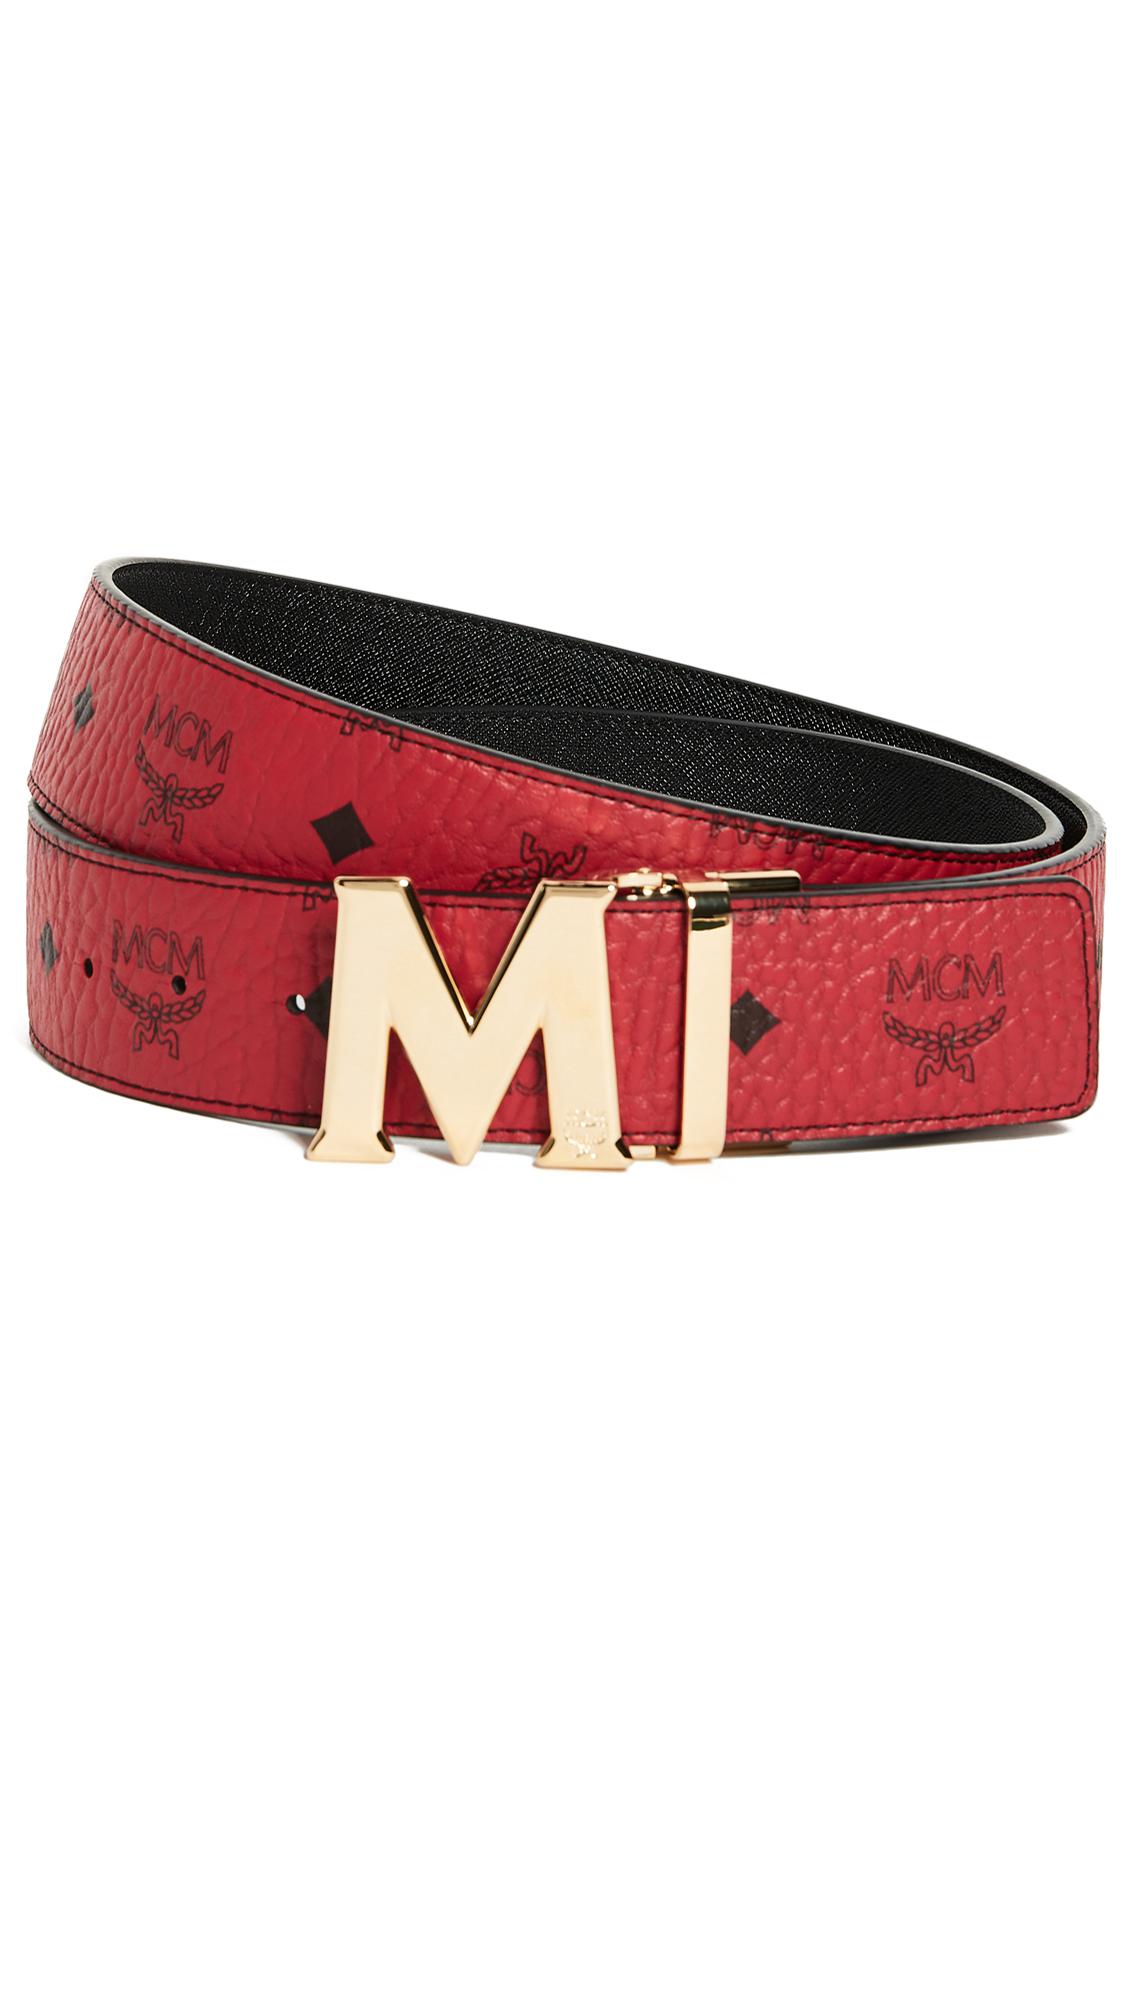 MCM Leather Gold M Buckle Reversible Belt in Red & Gold (Red) for Men - Lyst